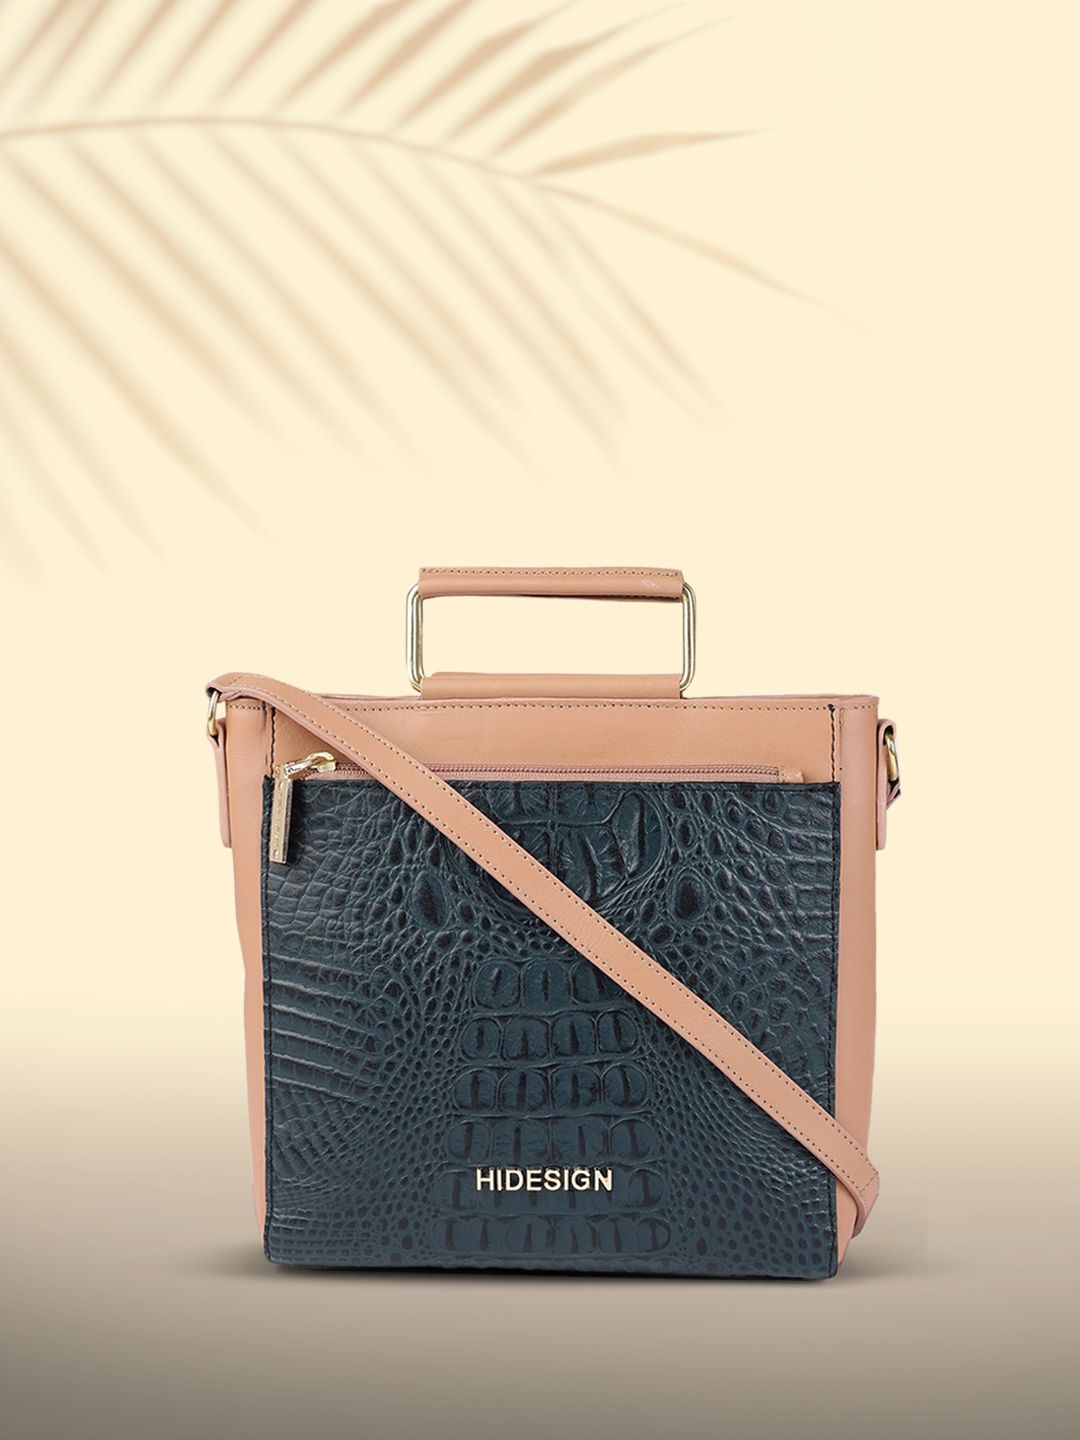 Hidesign Blue & Pink Textured Leather Handheld Bag Price in India